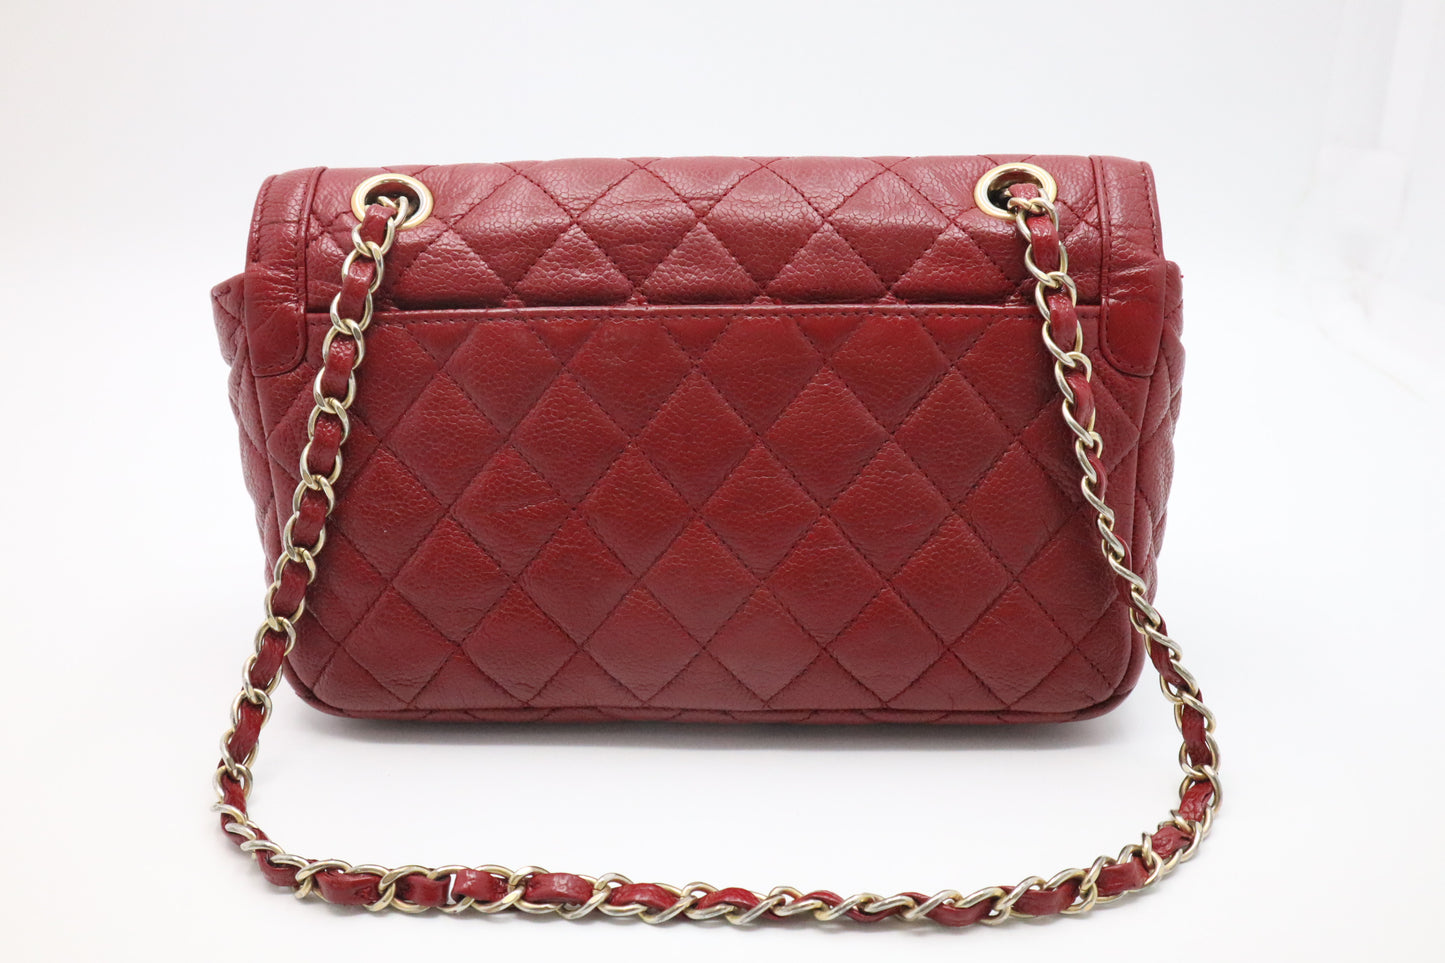 Chanel Classic Flap in Red Caviar Leather